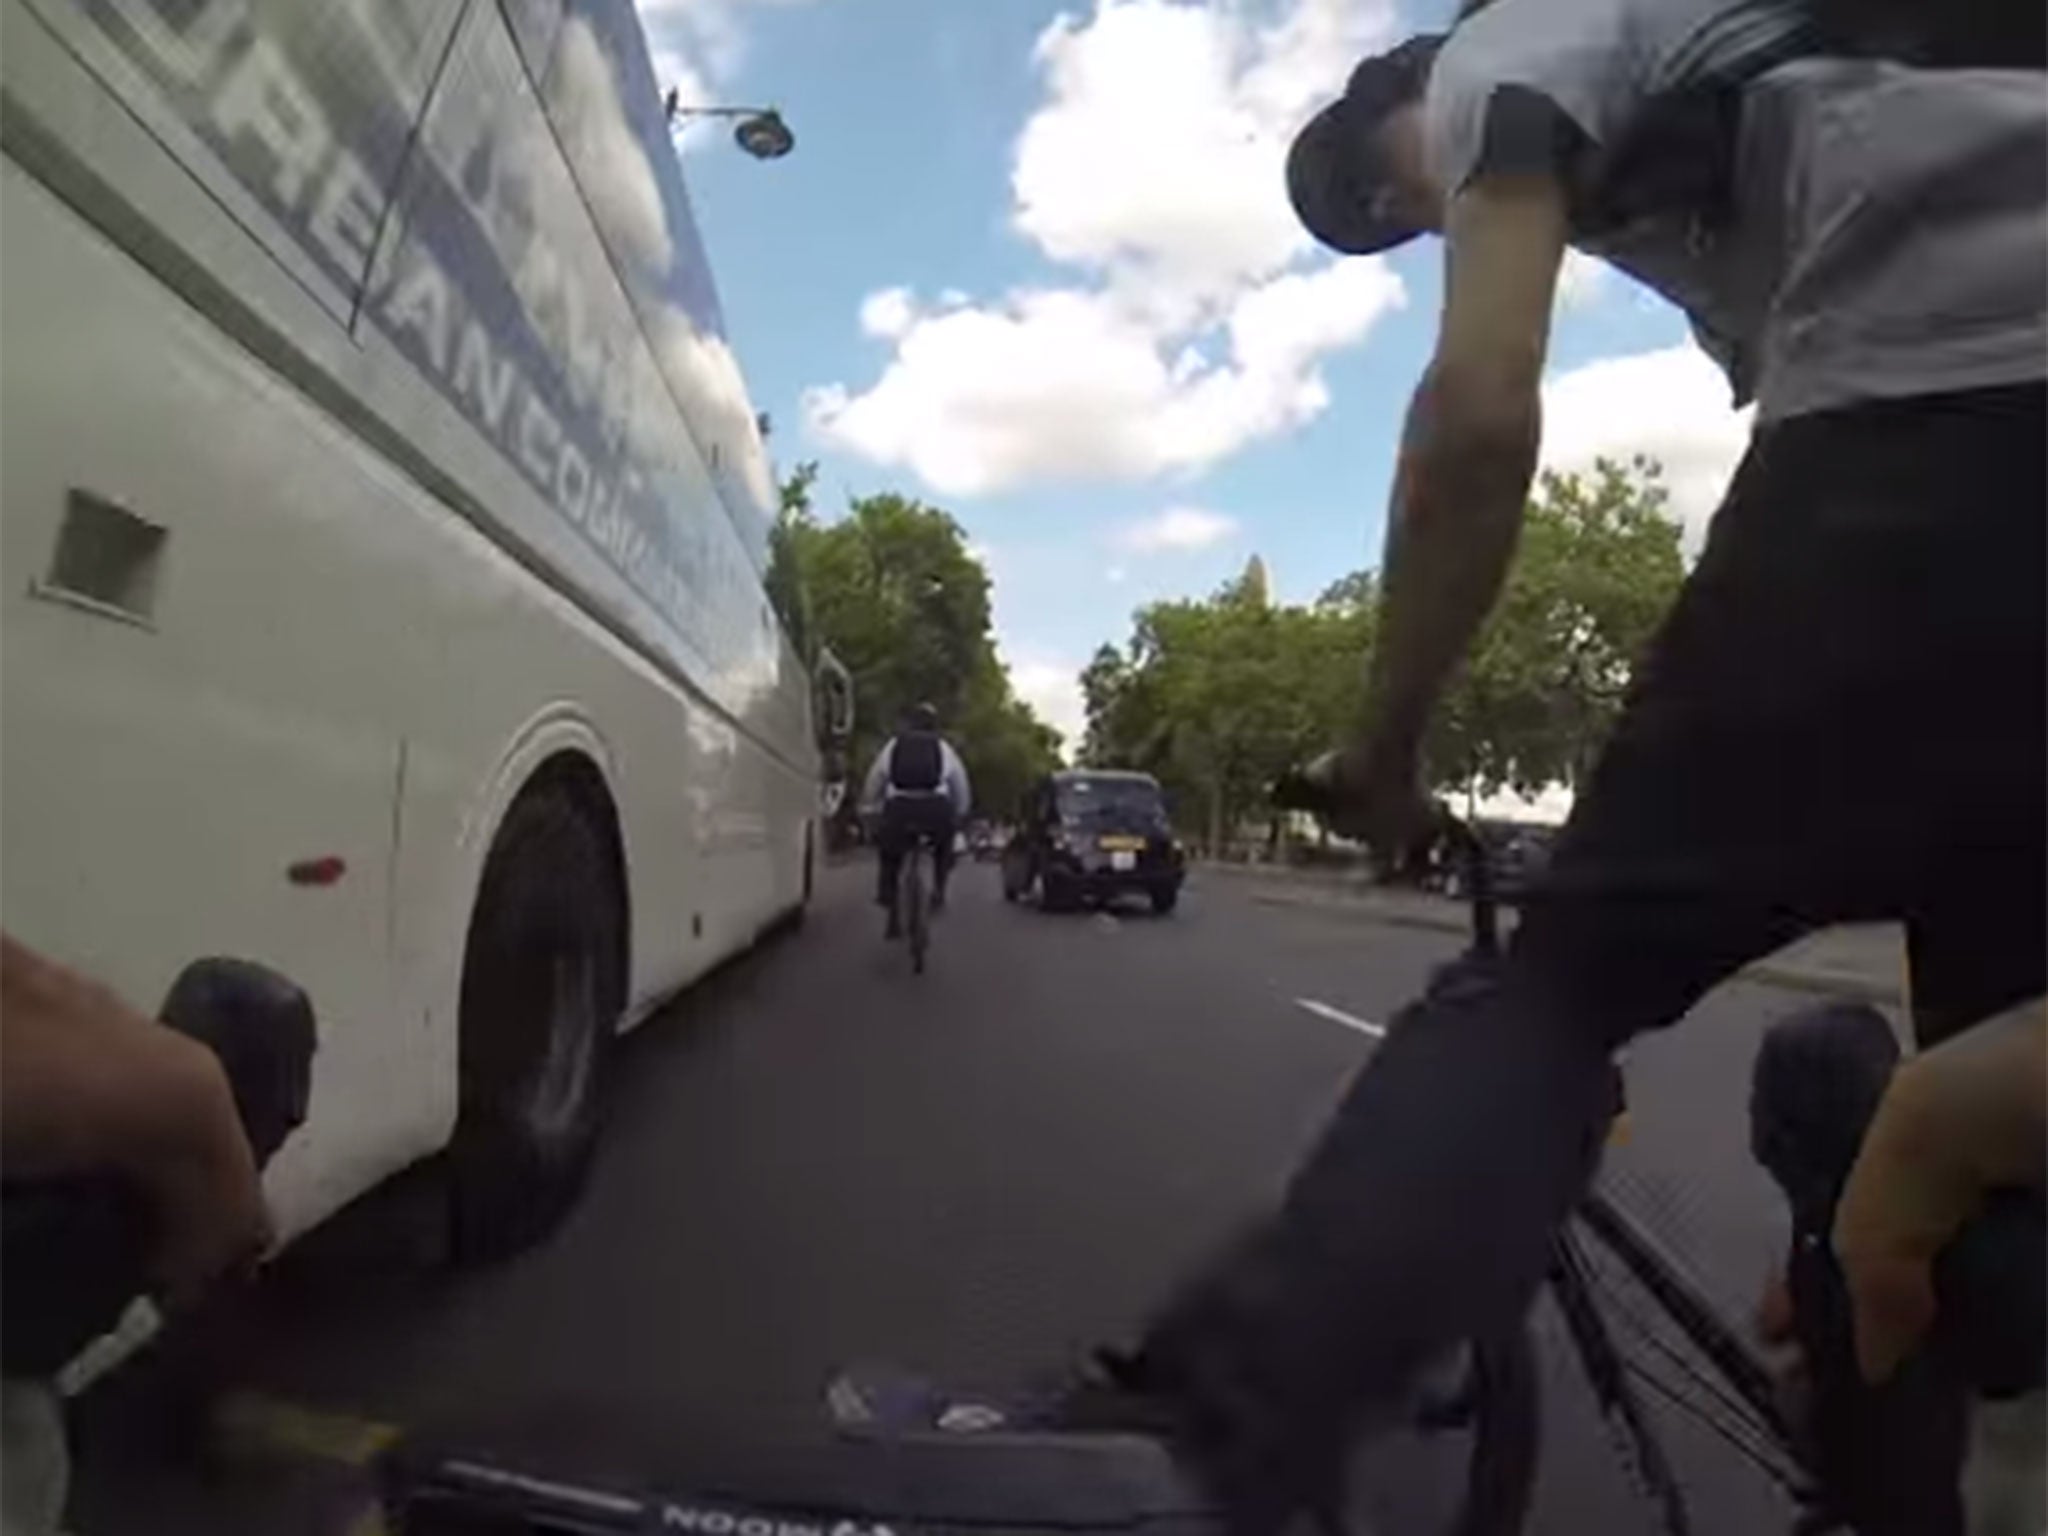 Cyclist-on-cyclist road rage filmed by Raphael Carrondo, who was lucky to escape alive.